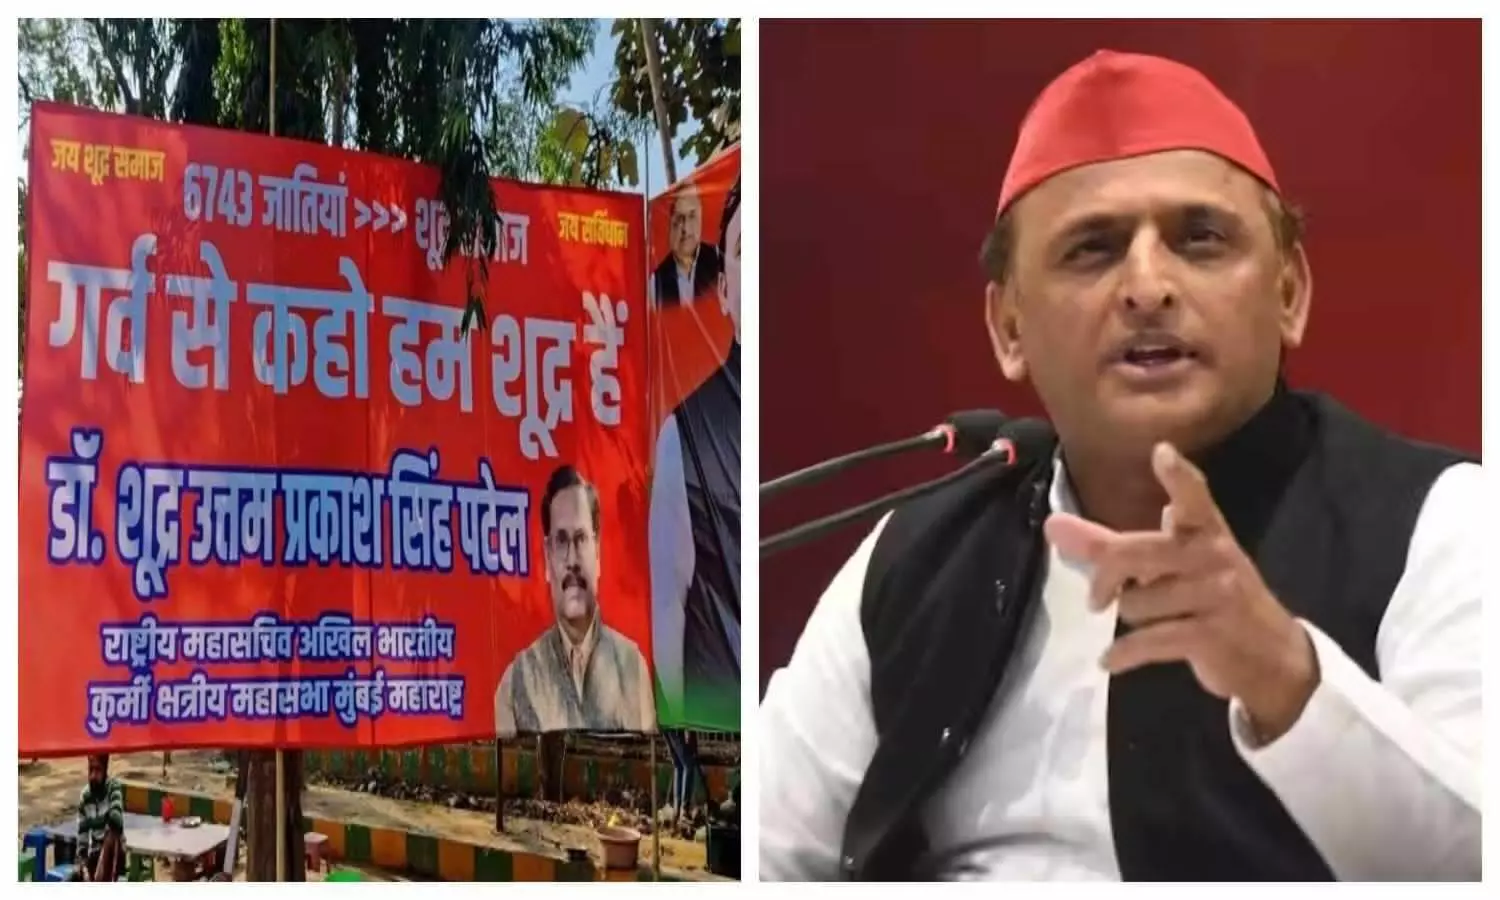 samajwadi party removed posters from lucknow party office